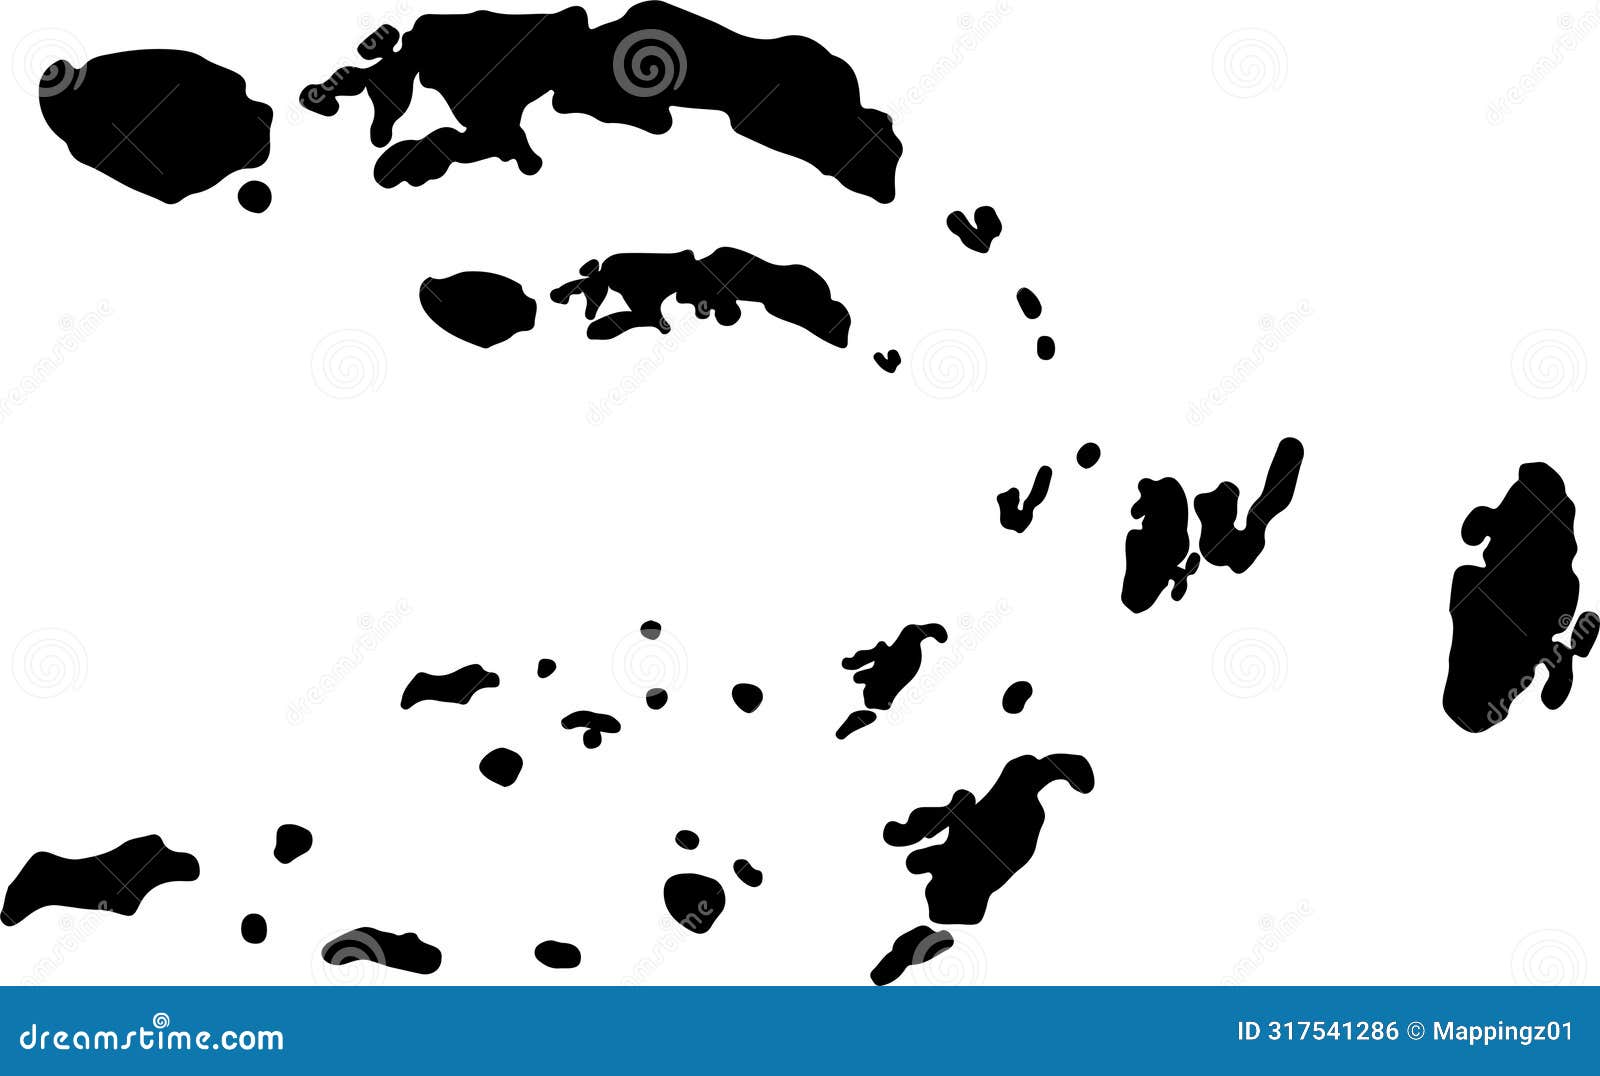 maluku indonesia silhouette map with transparent background